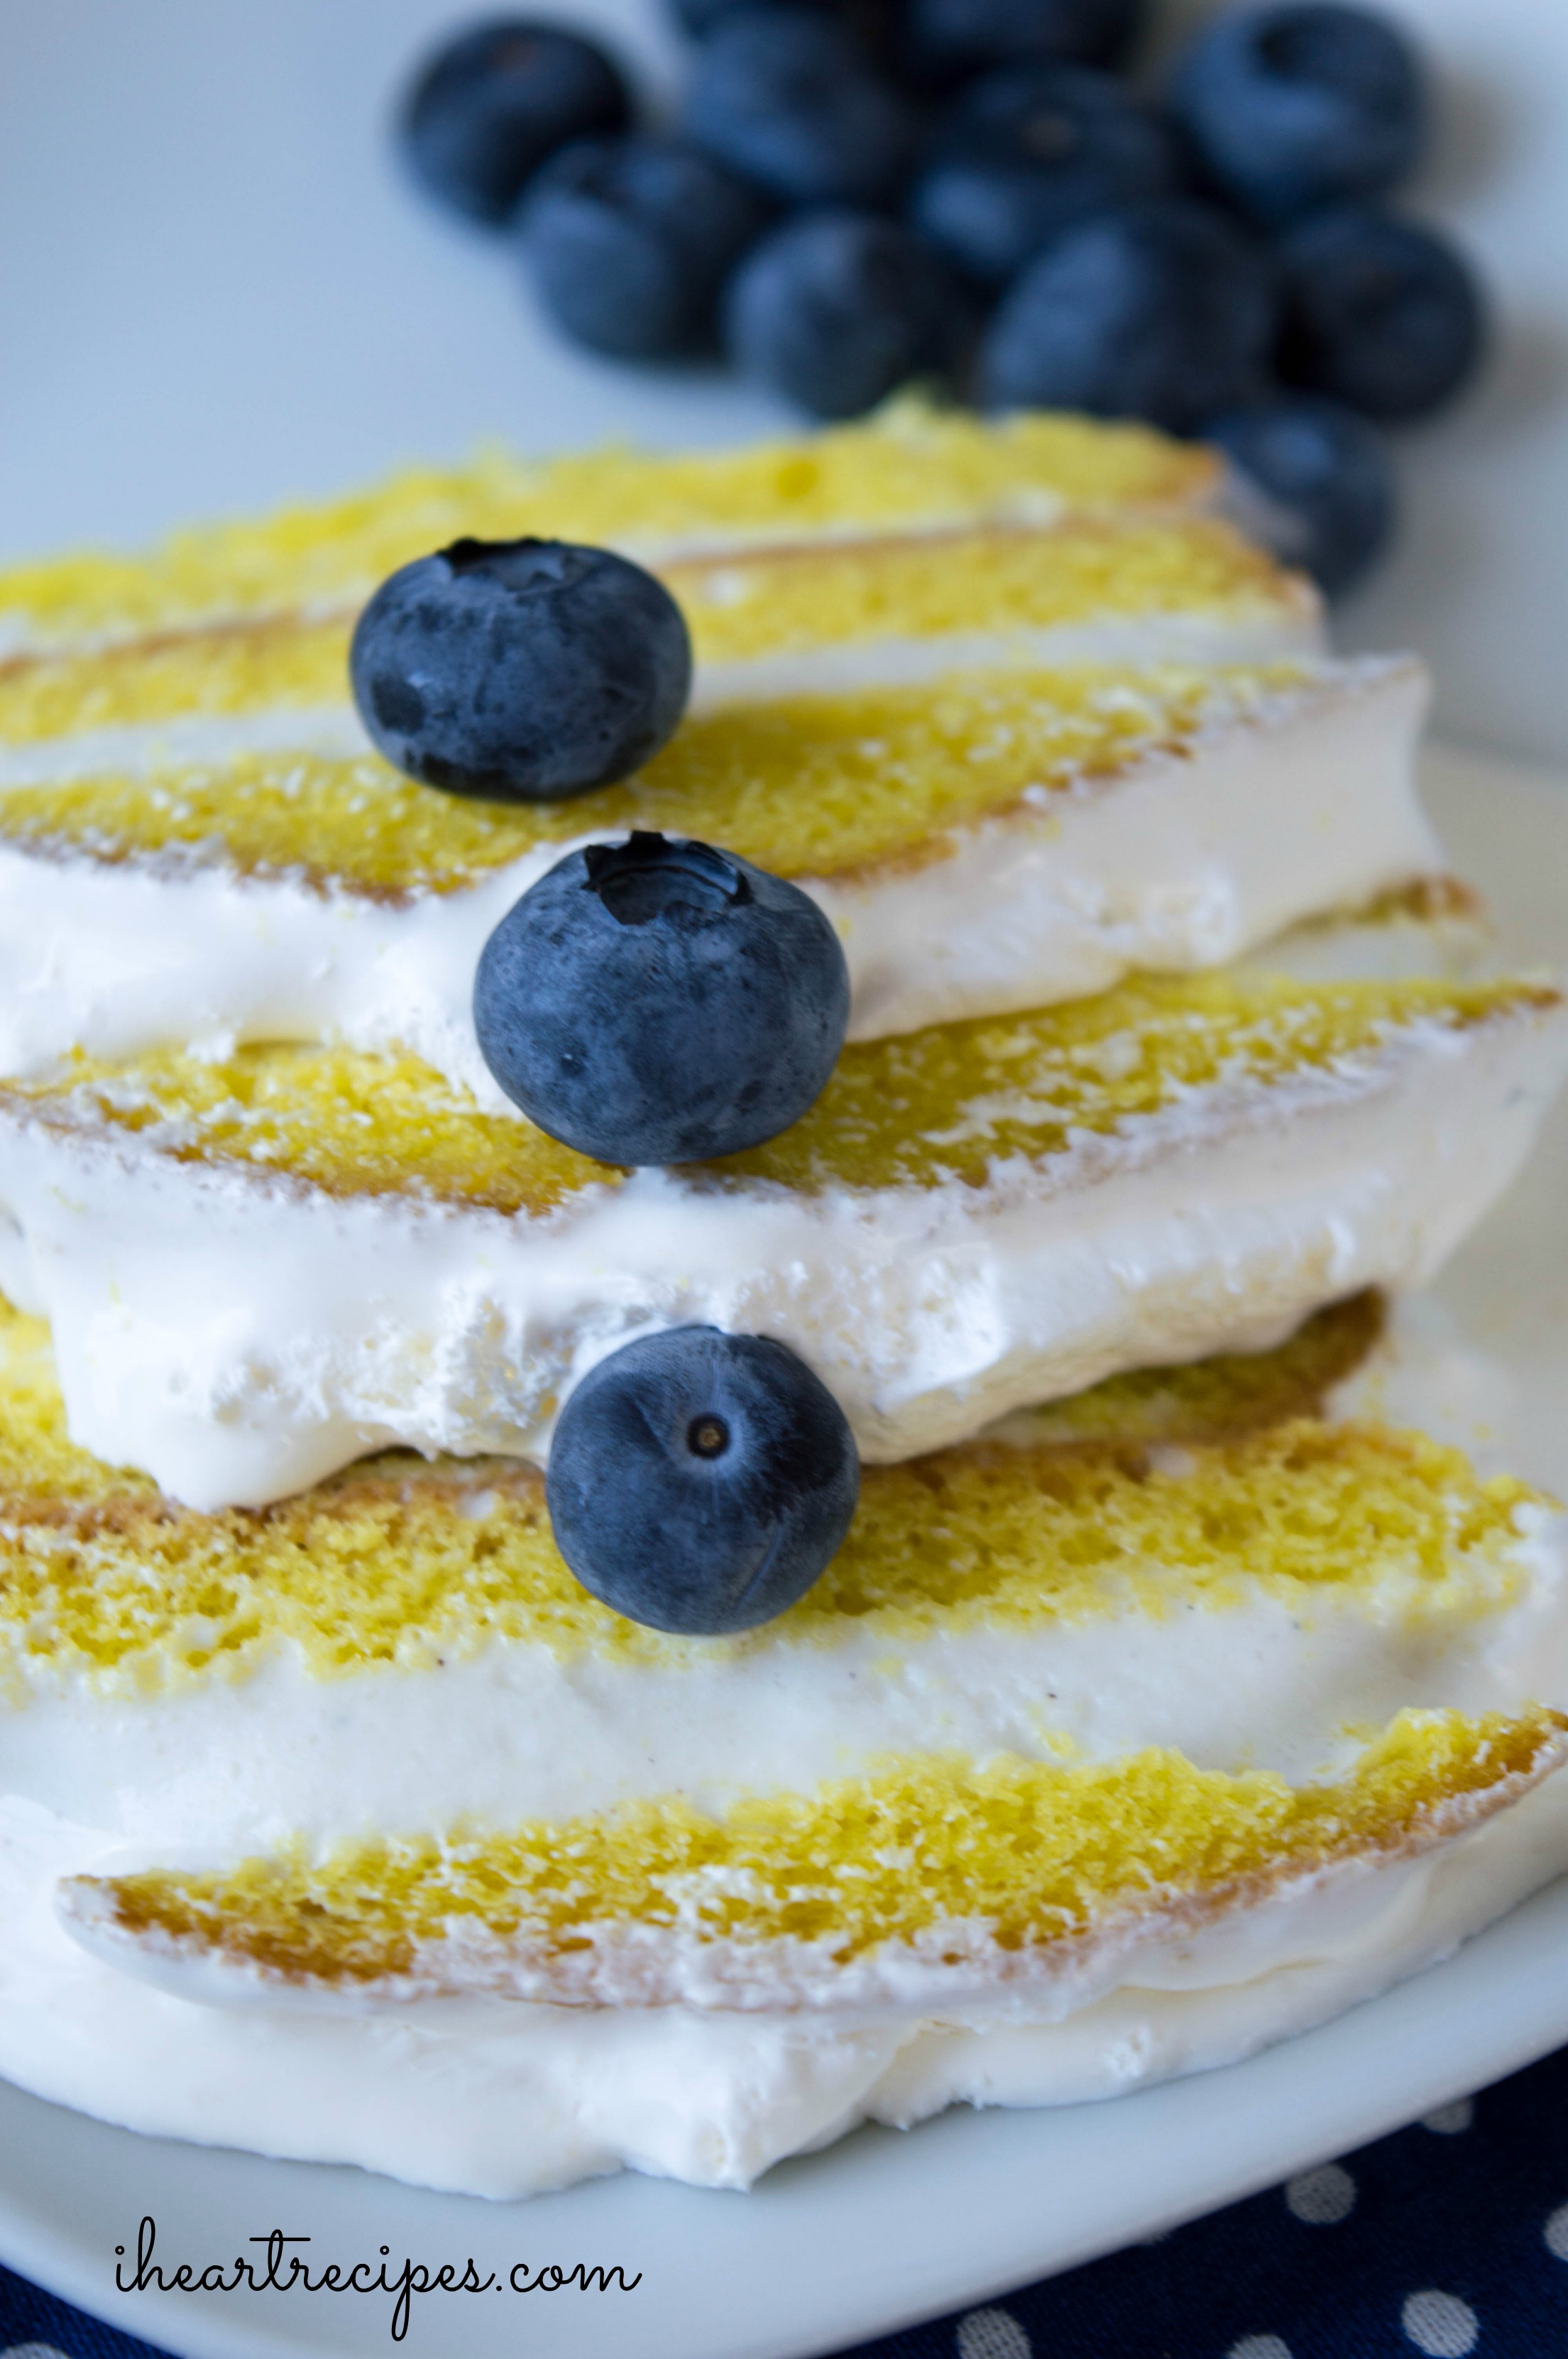 Top this refreshing lemon ice cream cake with blueberries for a sweet summer treat